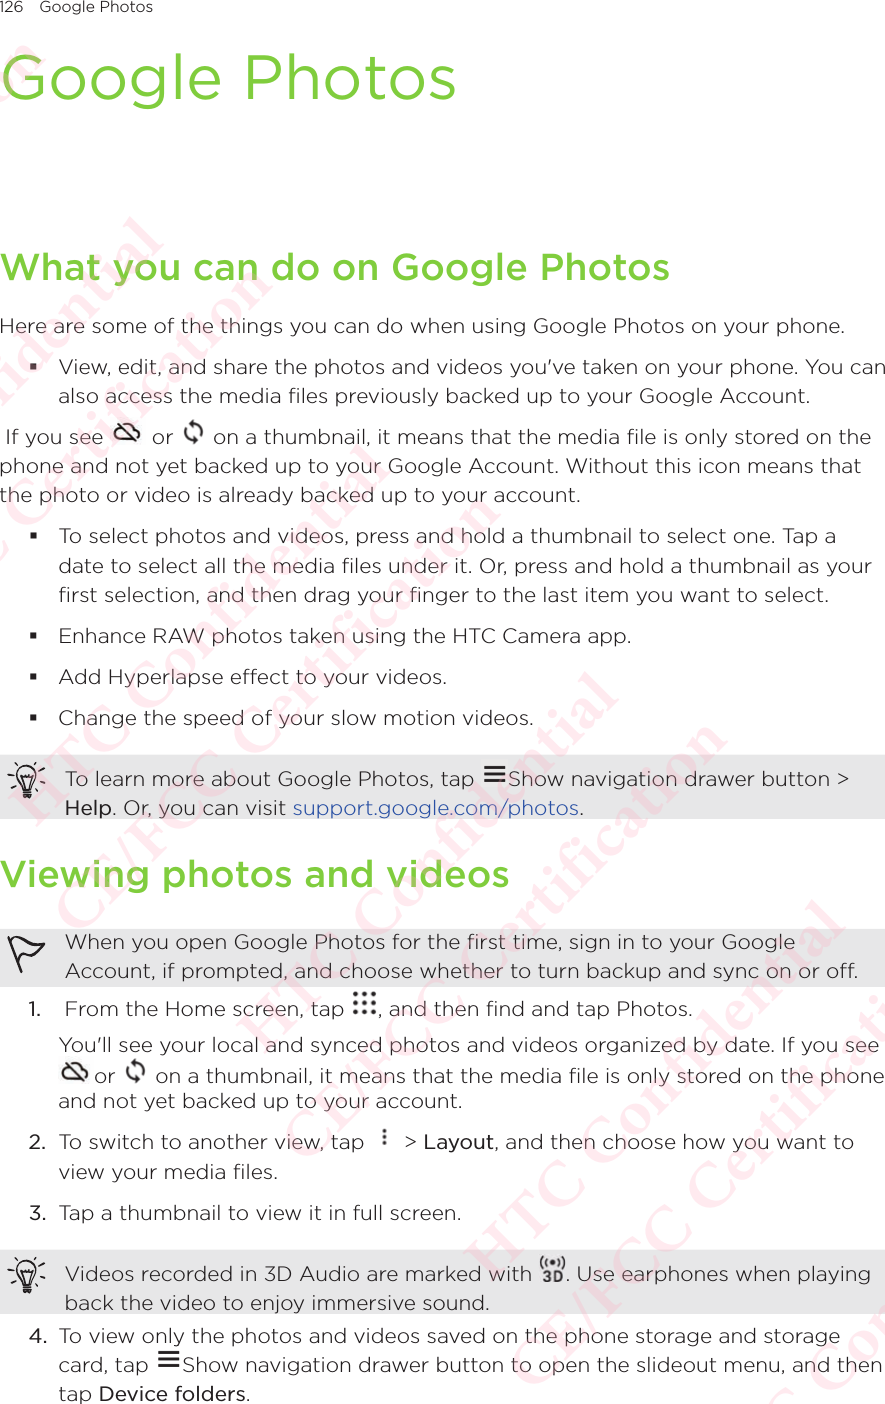 126 Google PhotosGoogle PhotosWhat you can do on Google PhotosHere are some of the things you can do when using Google Photos on your phone. View, edit, and share the photos and videos you&apos;ve taken on your phone. You can also access the media files previously backed up to your Google Account. If you see   or   on a thumbnail, it means that the media file is only stored on the phone and not yet backed up to your Google Account. Without this icon means that the photo or video is already backed up to your account. To select photos and videos, press and hold a thumbnail to select one. Tap a date to select all the media files under it. Or, press and hold a thumbnail as your first selection, and then drag your finger to the last item you want to select. Enhance RAW photos taken using the HTC Camera app. Add Hyperlapse effect to your videos. Change the speed of your slow motion videos.To learn more about Google Photos, tap  Show navigation drawer button &gt; Help. Or, you can visit support.google.com/photos.Viewing photos and videosWhen you open Google Photos for the first time, sign in to your Google Account, if prompted, and choose whether to turn backup and sync on or off.1.   From the Home screen, tap  , and then find and tap Photos. You&apos;ll see your local and synced photos and videos organized by date. If you see or   on a thumbnail, it means that the media file is only stored on the phone and not yet backed up to your account.2.  To switch to another view, tap   &gt; Layout, and then choose how you want to view your media files.3.  Tap a thumbnail to view it in full screen.Videos recorded in 3D Audio are marked with  . Use earphones when playing back the video to enjoy immersive sound.4.  To view only the photos and videos saved on the phone storage and storage card, tap To view only the photos and videos saved on the phone storage and storage Show navigation drawer button to open the slideout menu, and then tap Device folders.HTC Confidential  CE/FCC Certification  HTC Confidential  CE/FCC Certification  HTC Confidential  CE/FCC Certification  HTC Confidential  CE/FCC Certification  HTC Confidential  CE/FCC Certification  HTC Confidential  CE/FCC Certification 